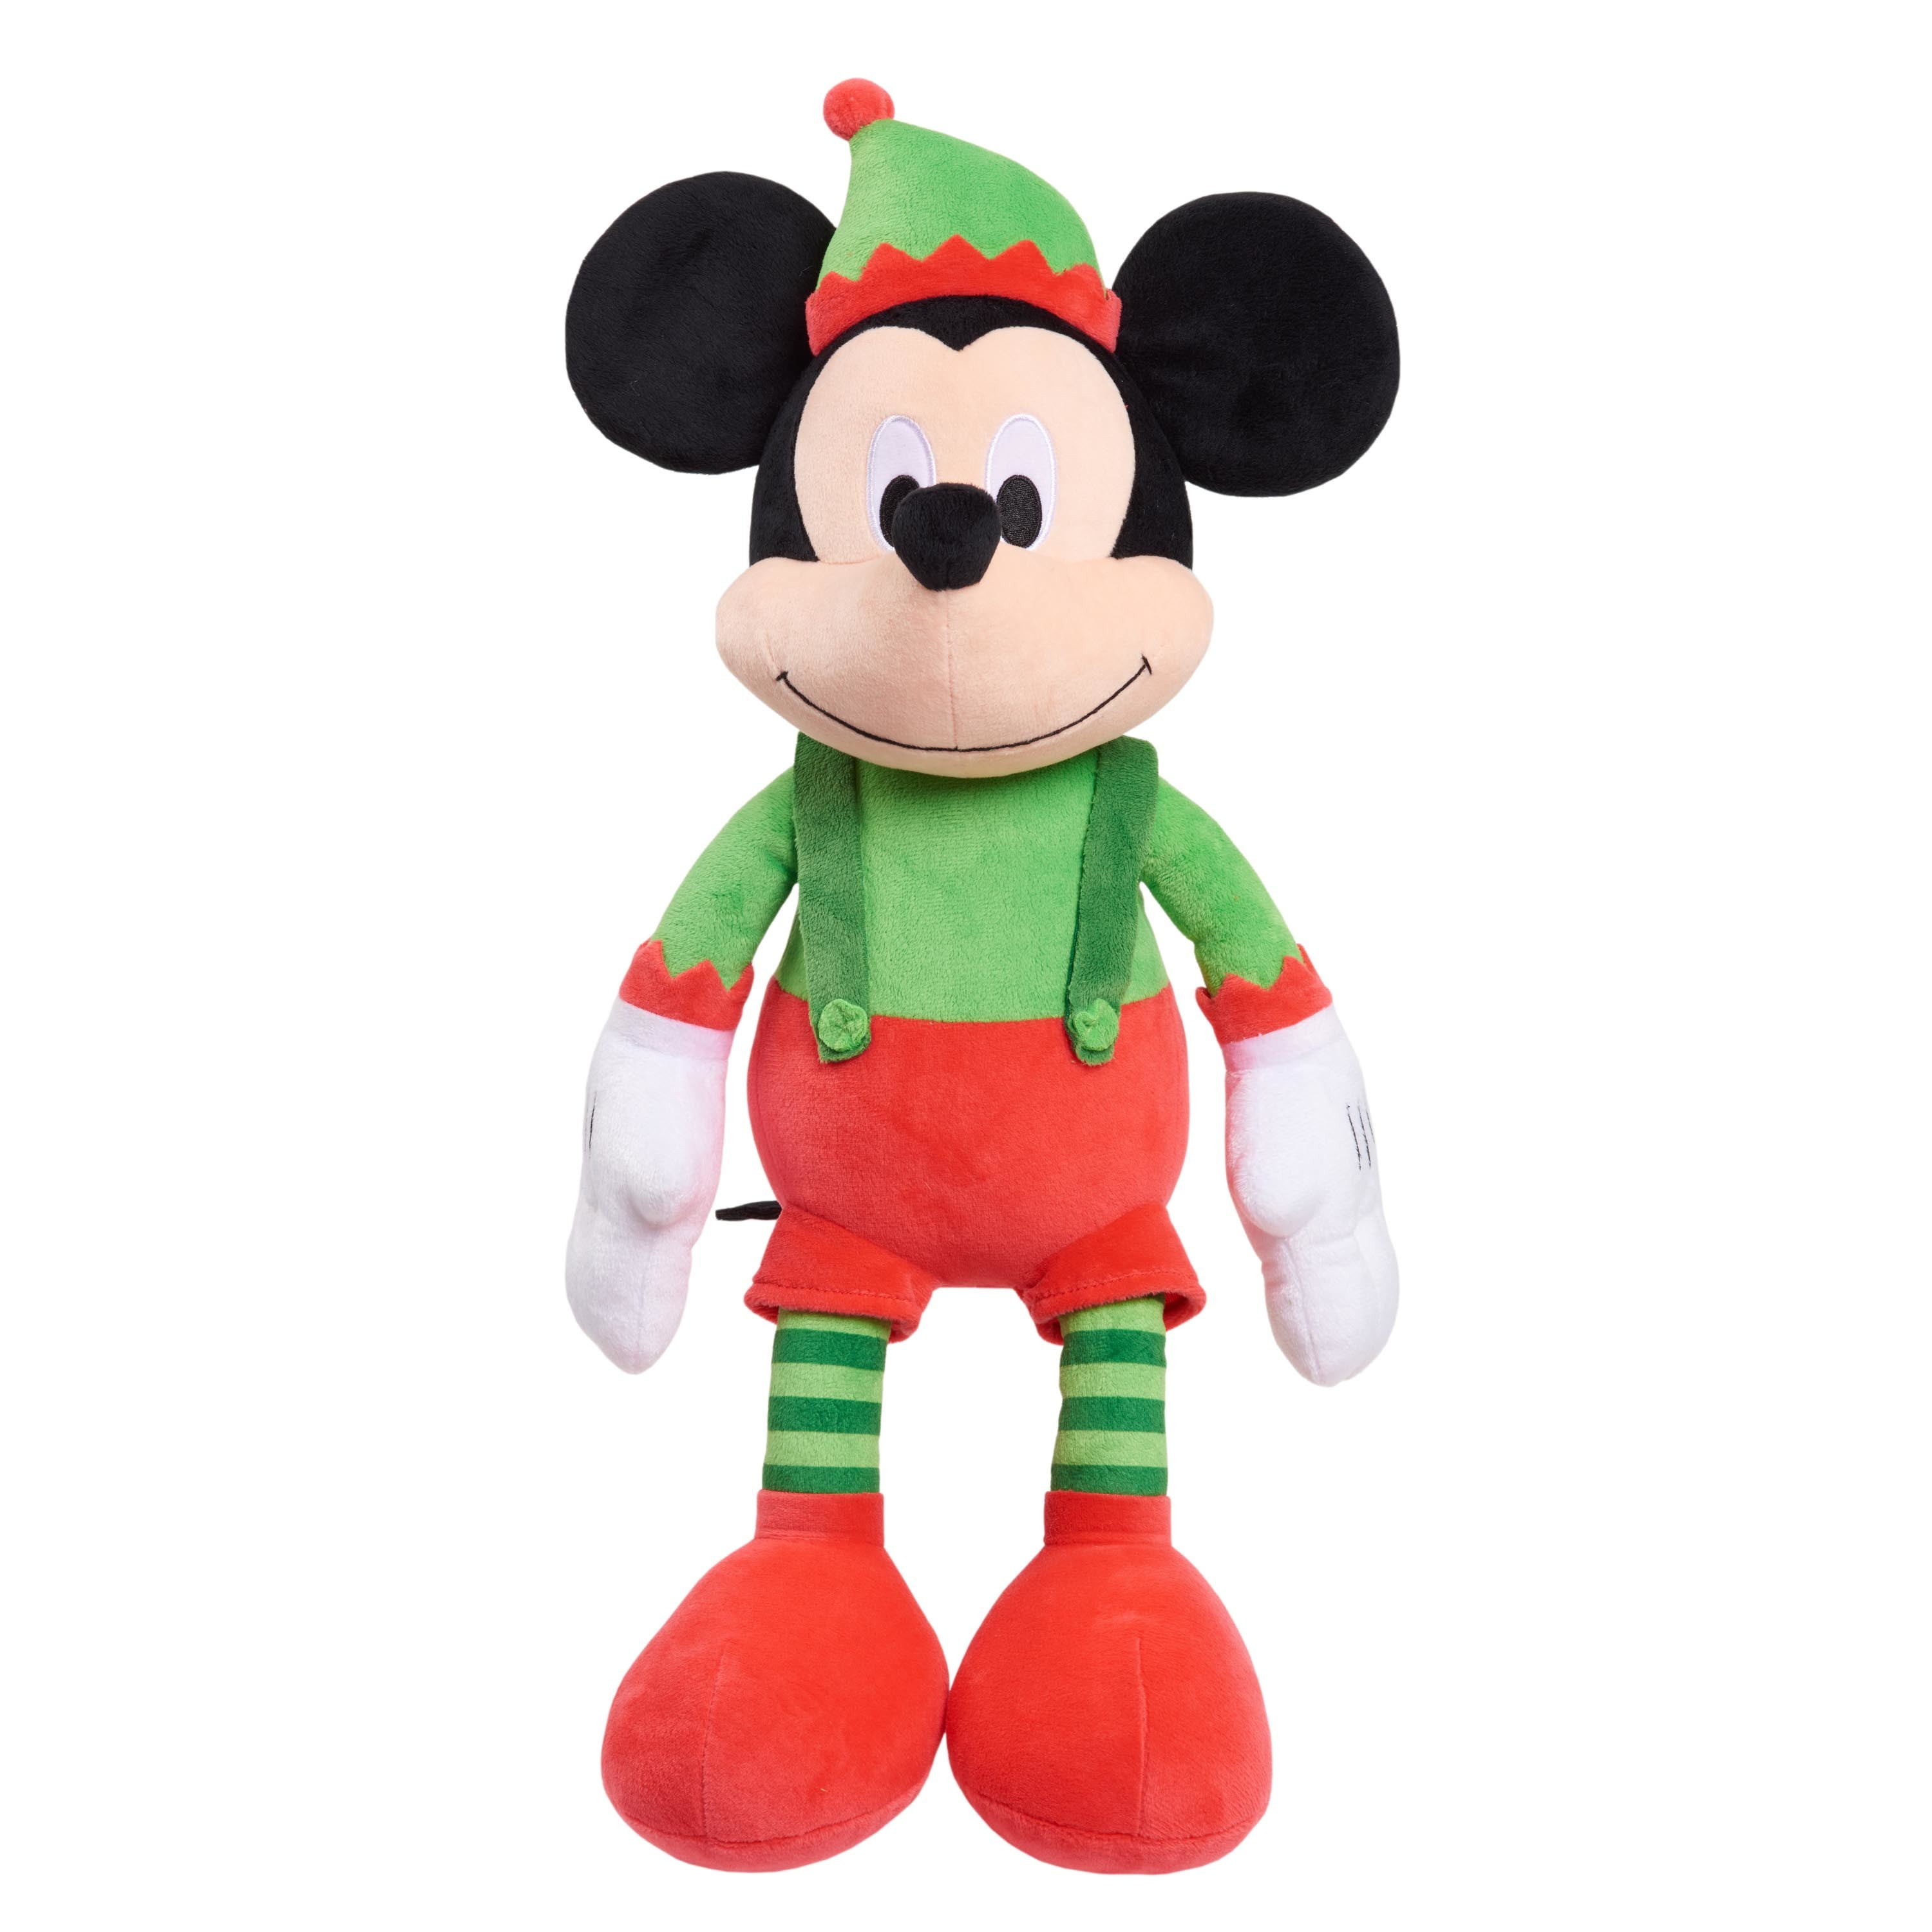 New 13" Musical/Animated Mickey Mouse Disney Christmas Plush Sings Deck the Hall 